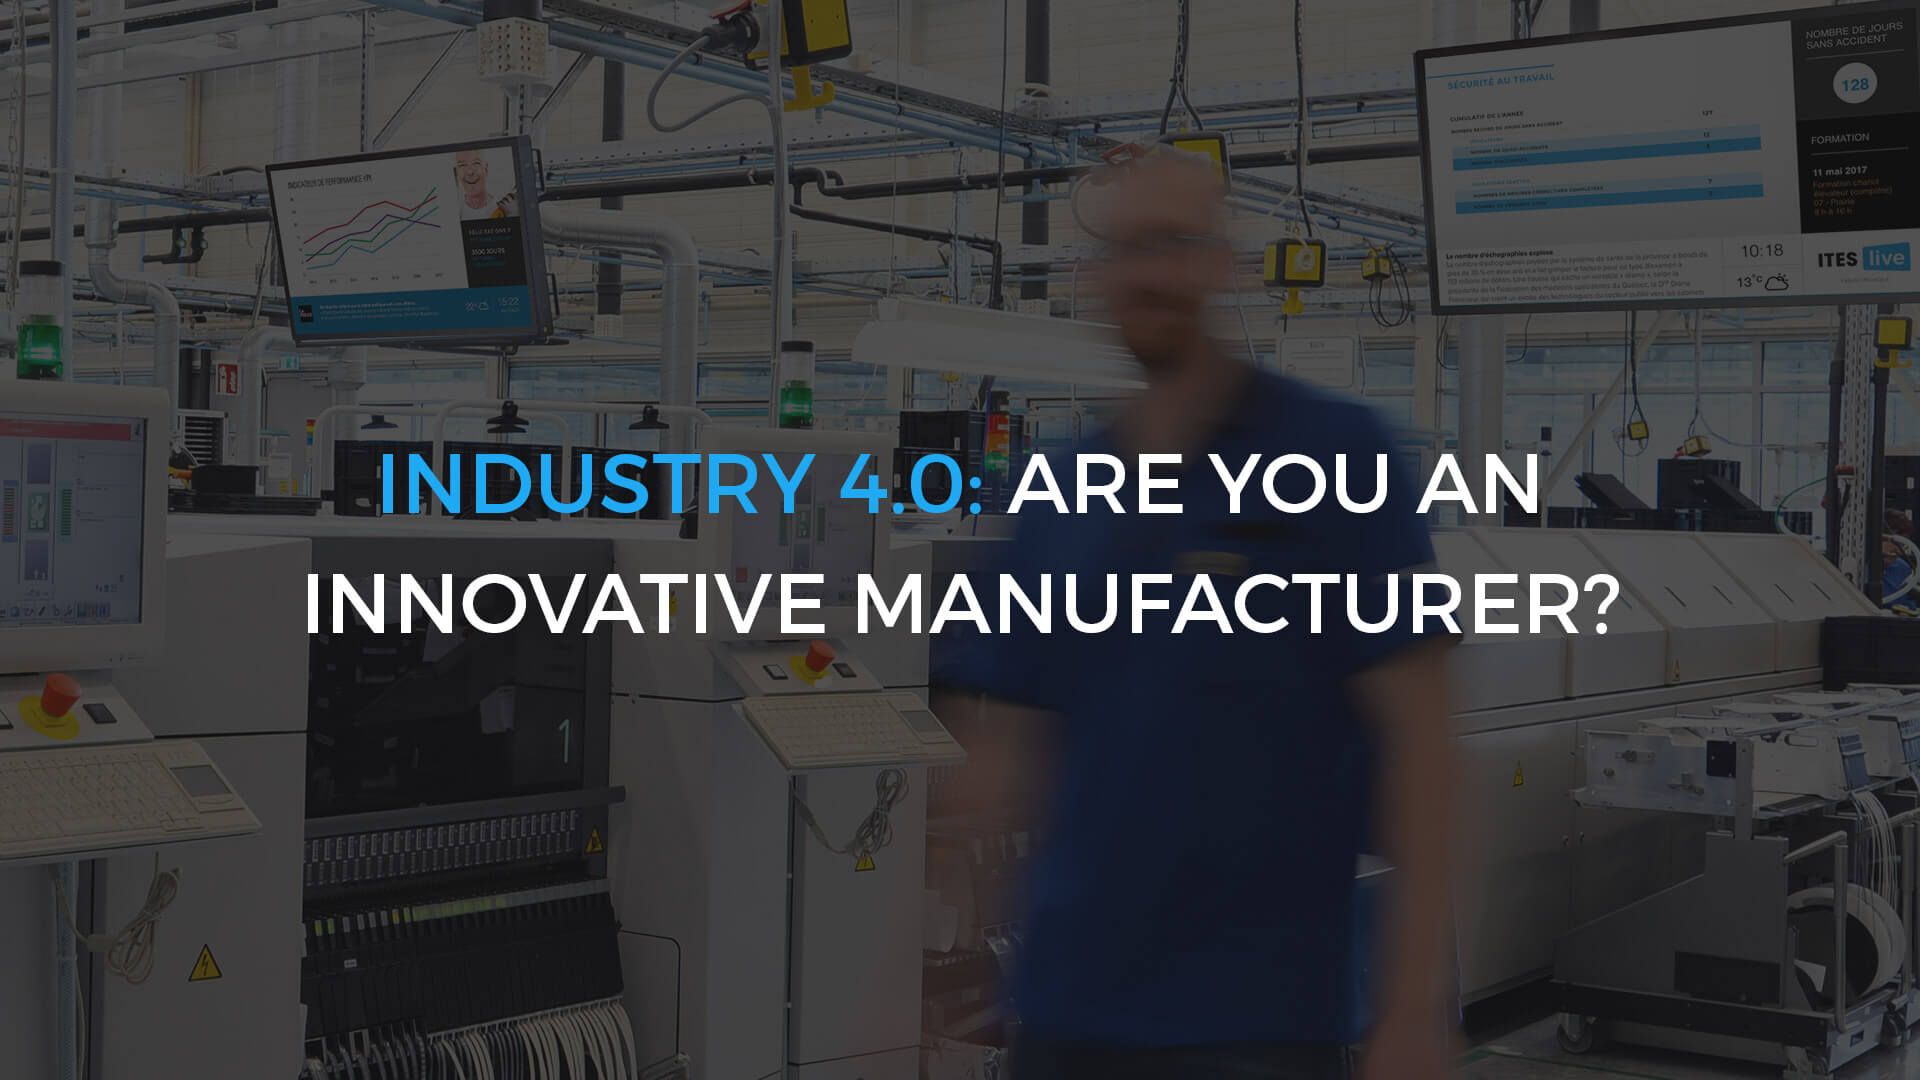 Industry 4.0: are you an innovative manufacturer?